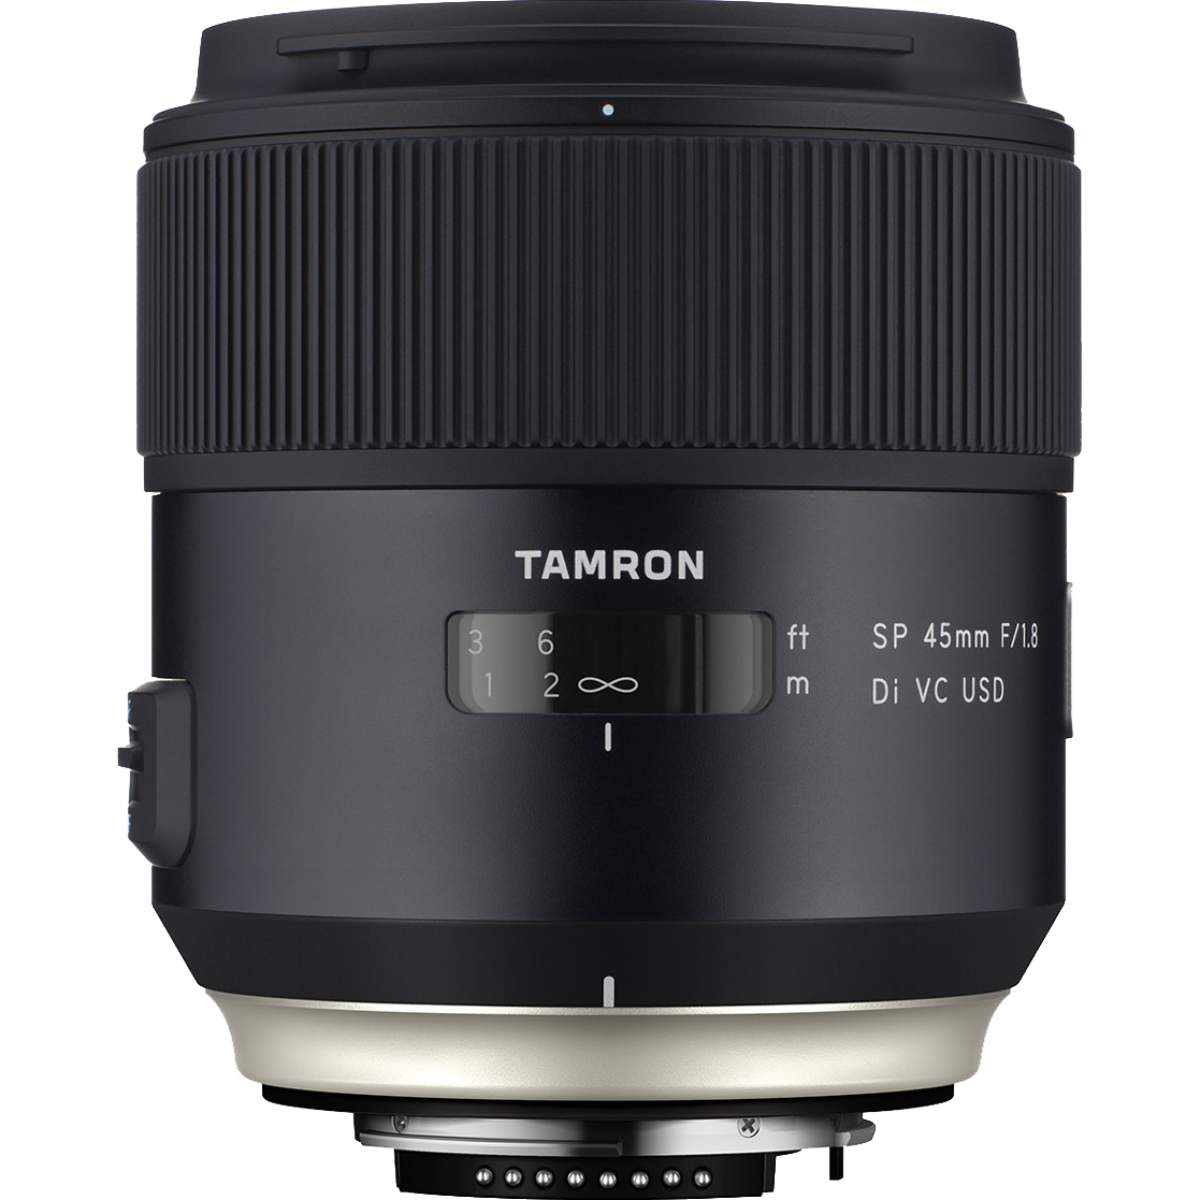 Tamron 45mm f/1.8 SP Di VC USD Lens for Canon EF - image 1 of 3